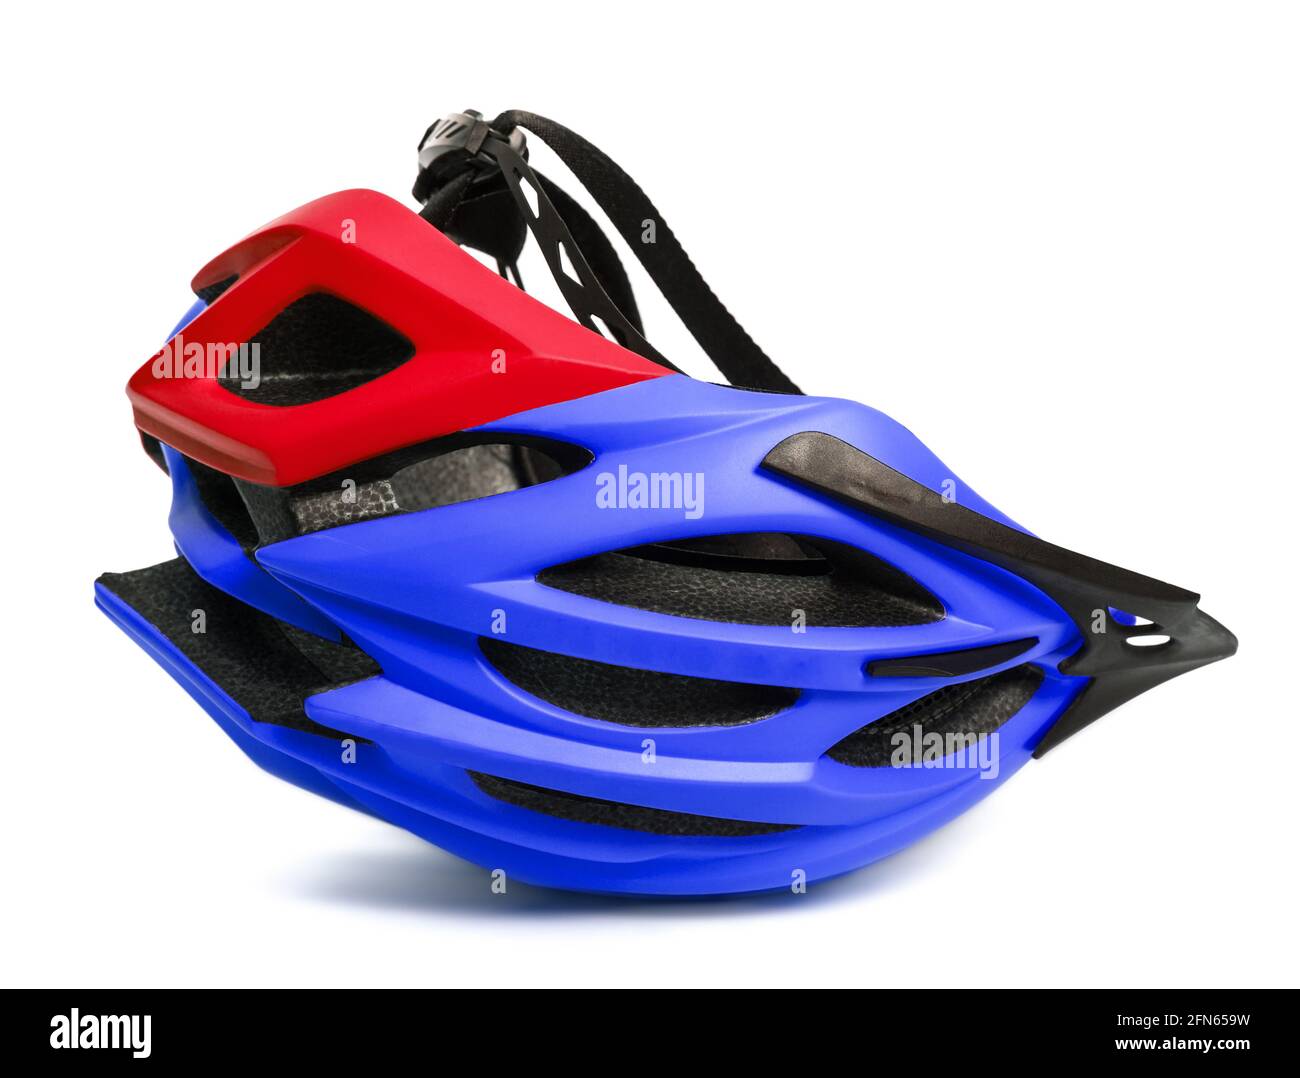 Blue and red helmet upside down isolated on white background Stock Photo